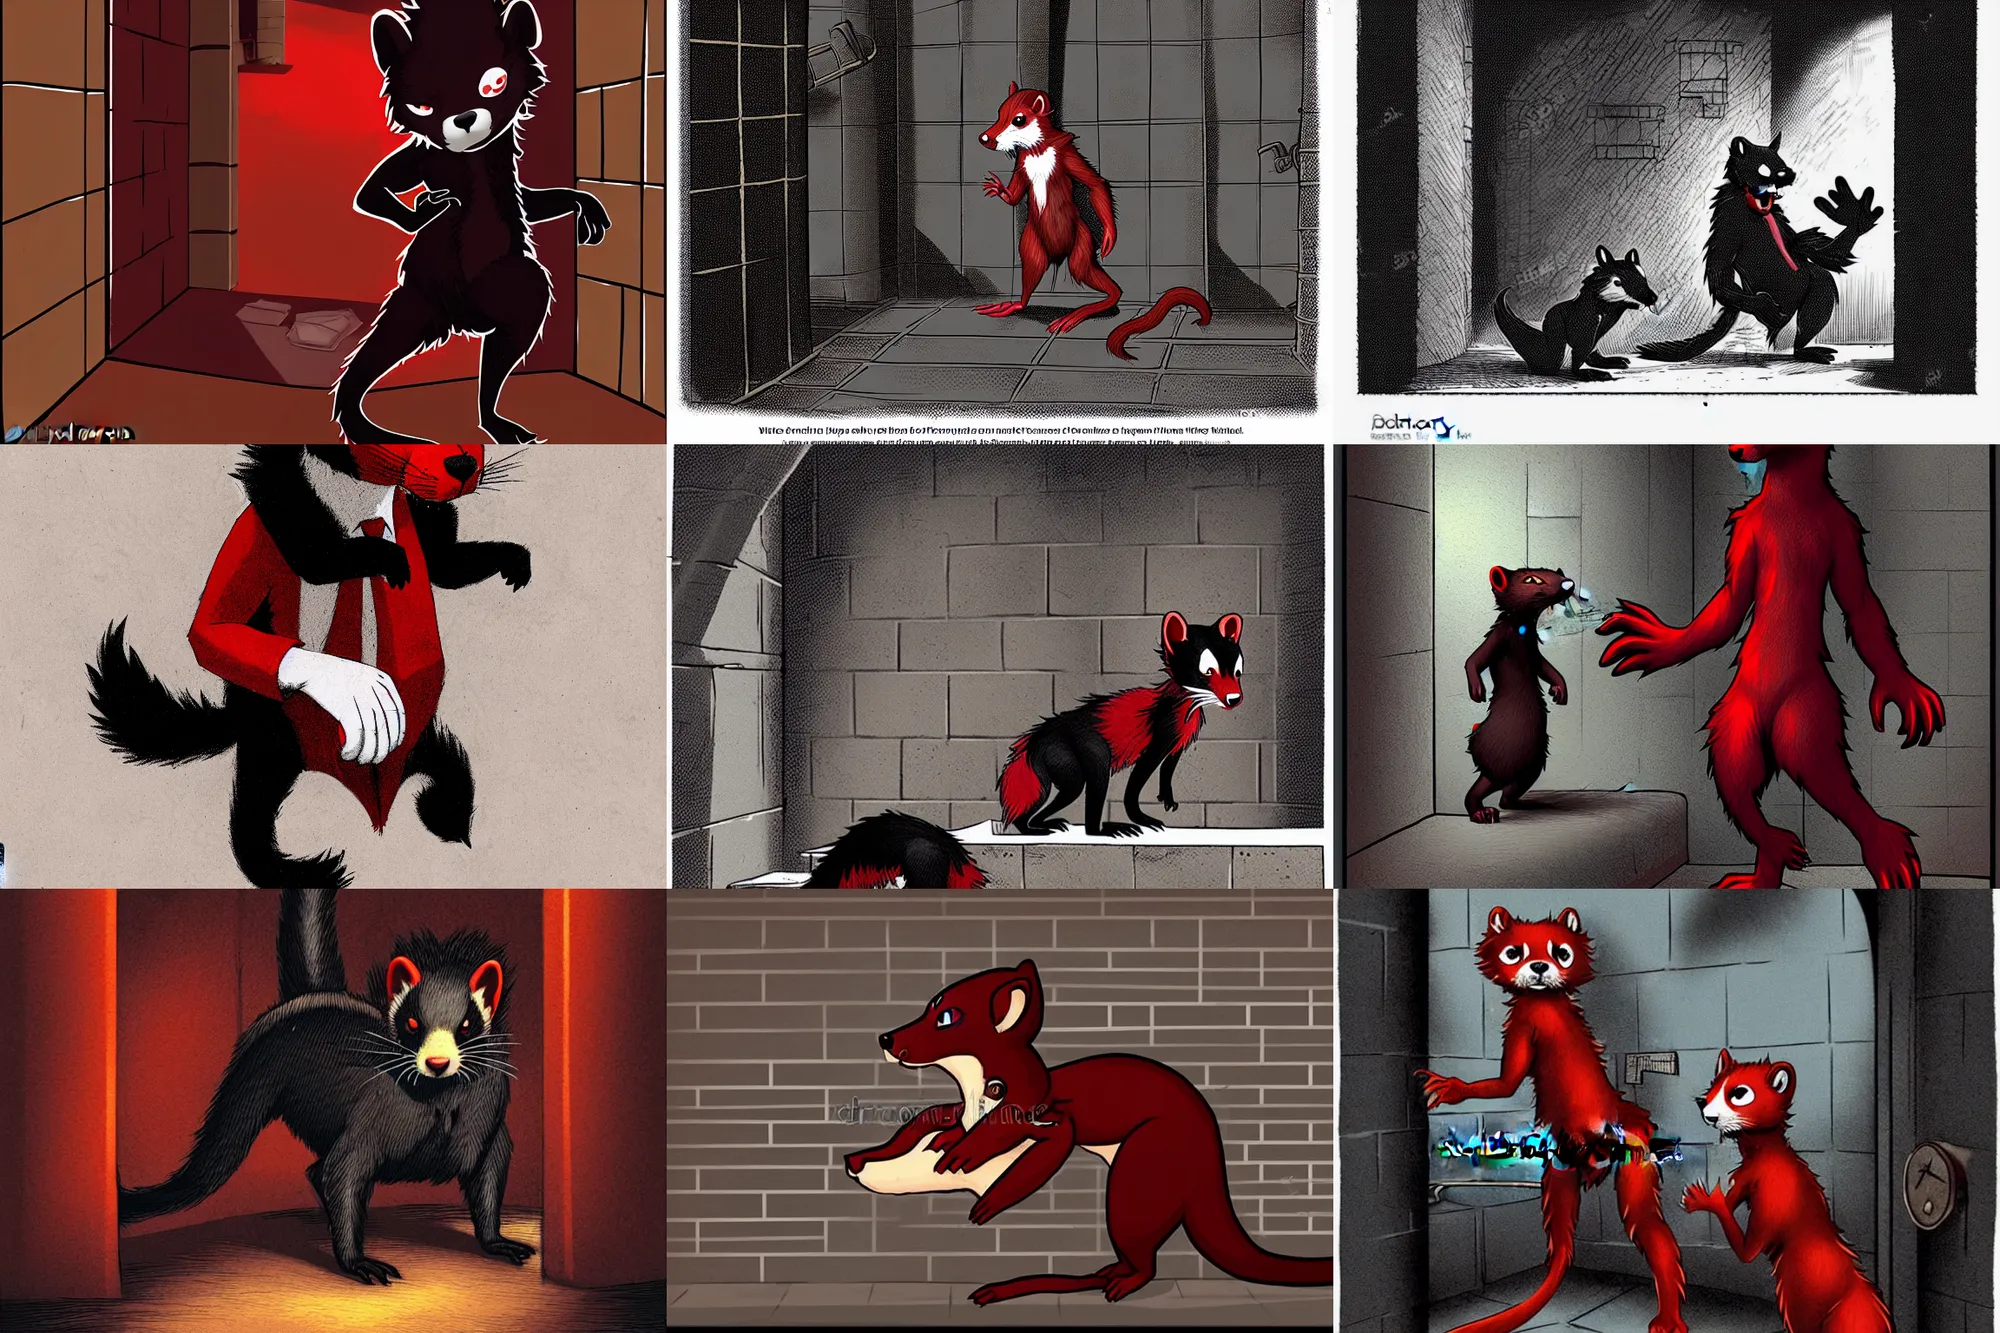 Prompt: world of darkness source book illustration of an anthropomorphic red - black furry weasel - ferret - stoat fursona ( from the furry fandom ) in prisoner's regalia, in a prison cell, scratching at the walls